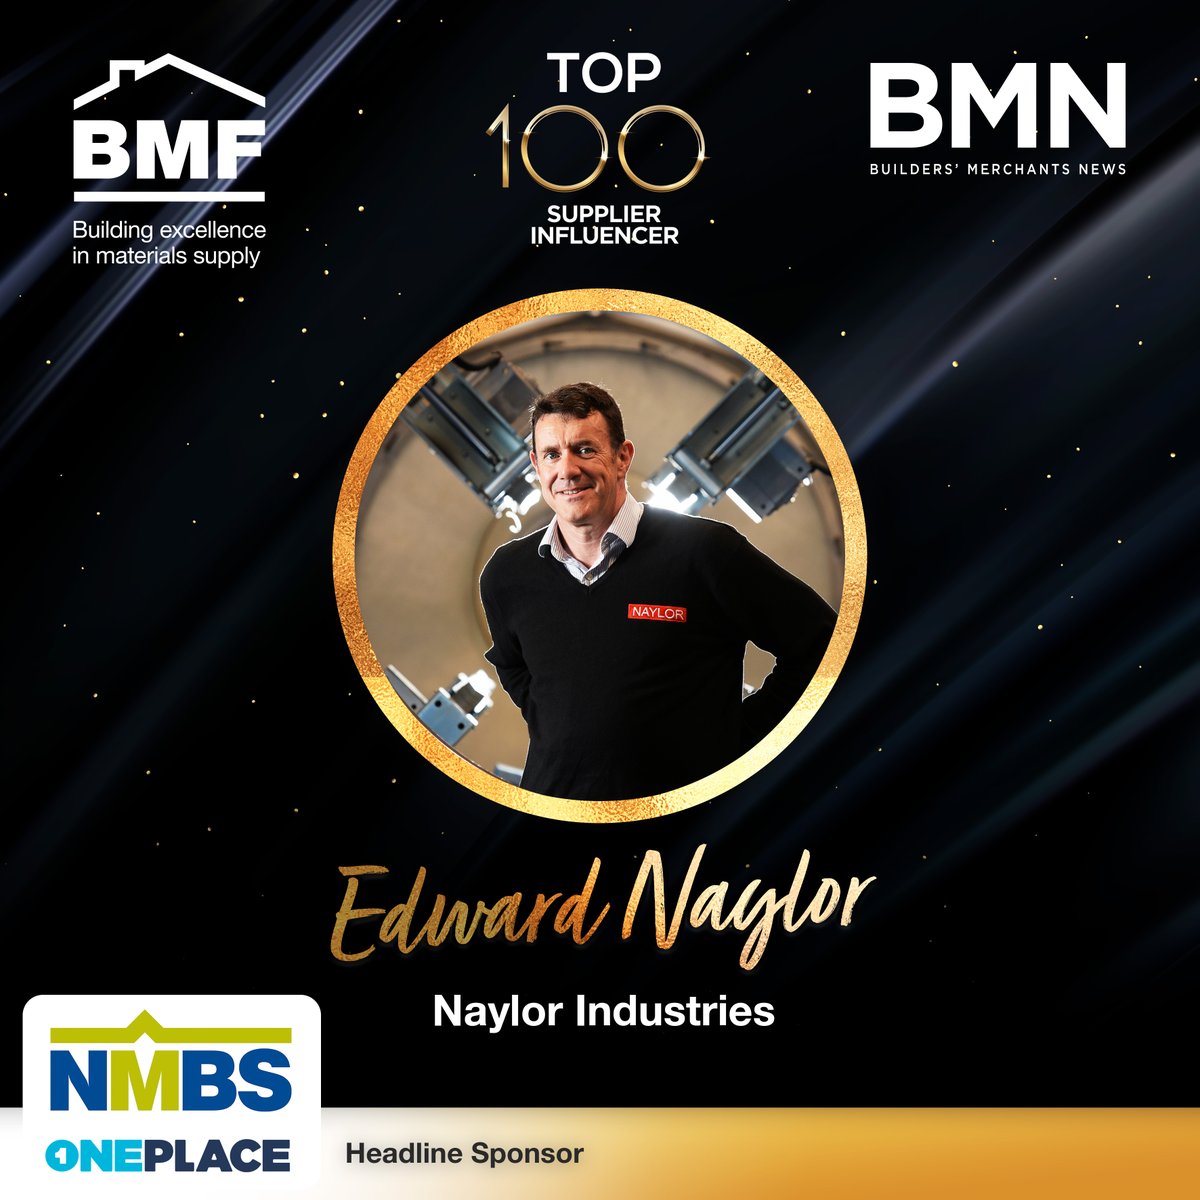 We are so proud that Edward Naylor has been nominated as one of the Top 100 Supplier Influencers by national trade body BMF.

#influencer #naylor #buildersmerchants #supplier #manufacturer #construction 
#BuildersMerchantsFederation